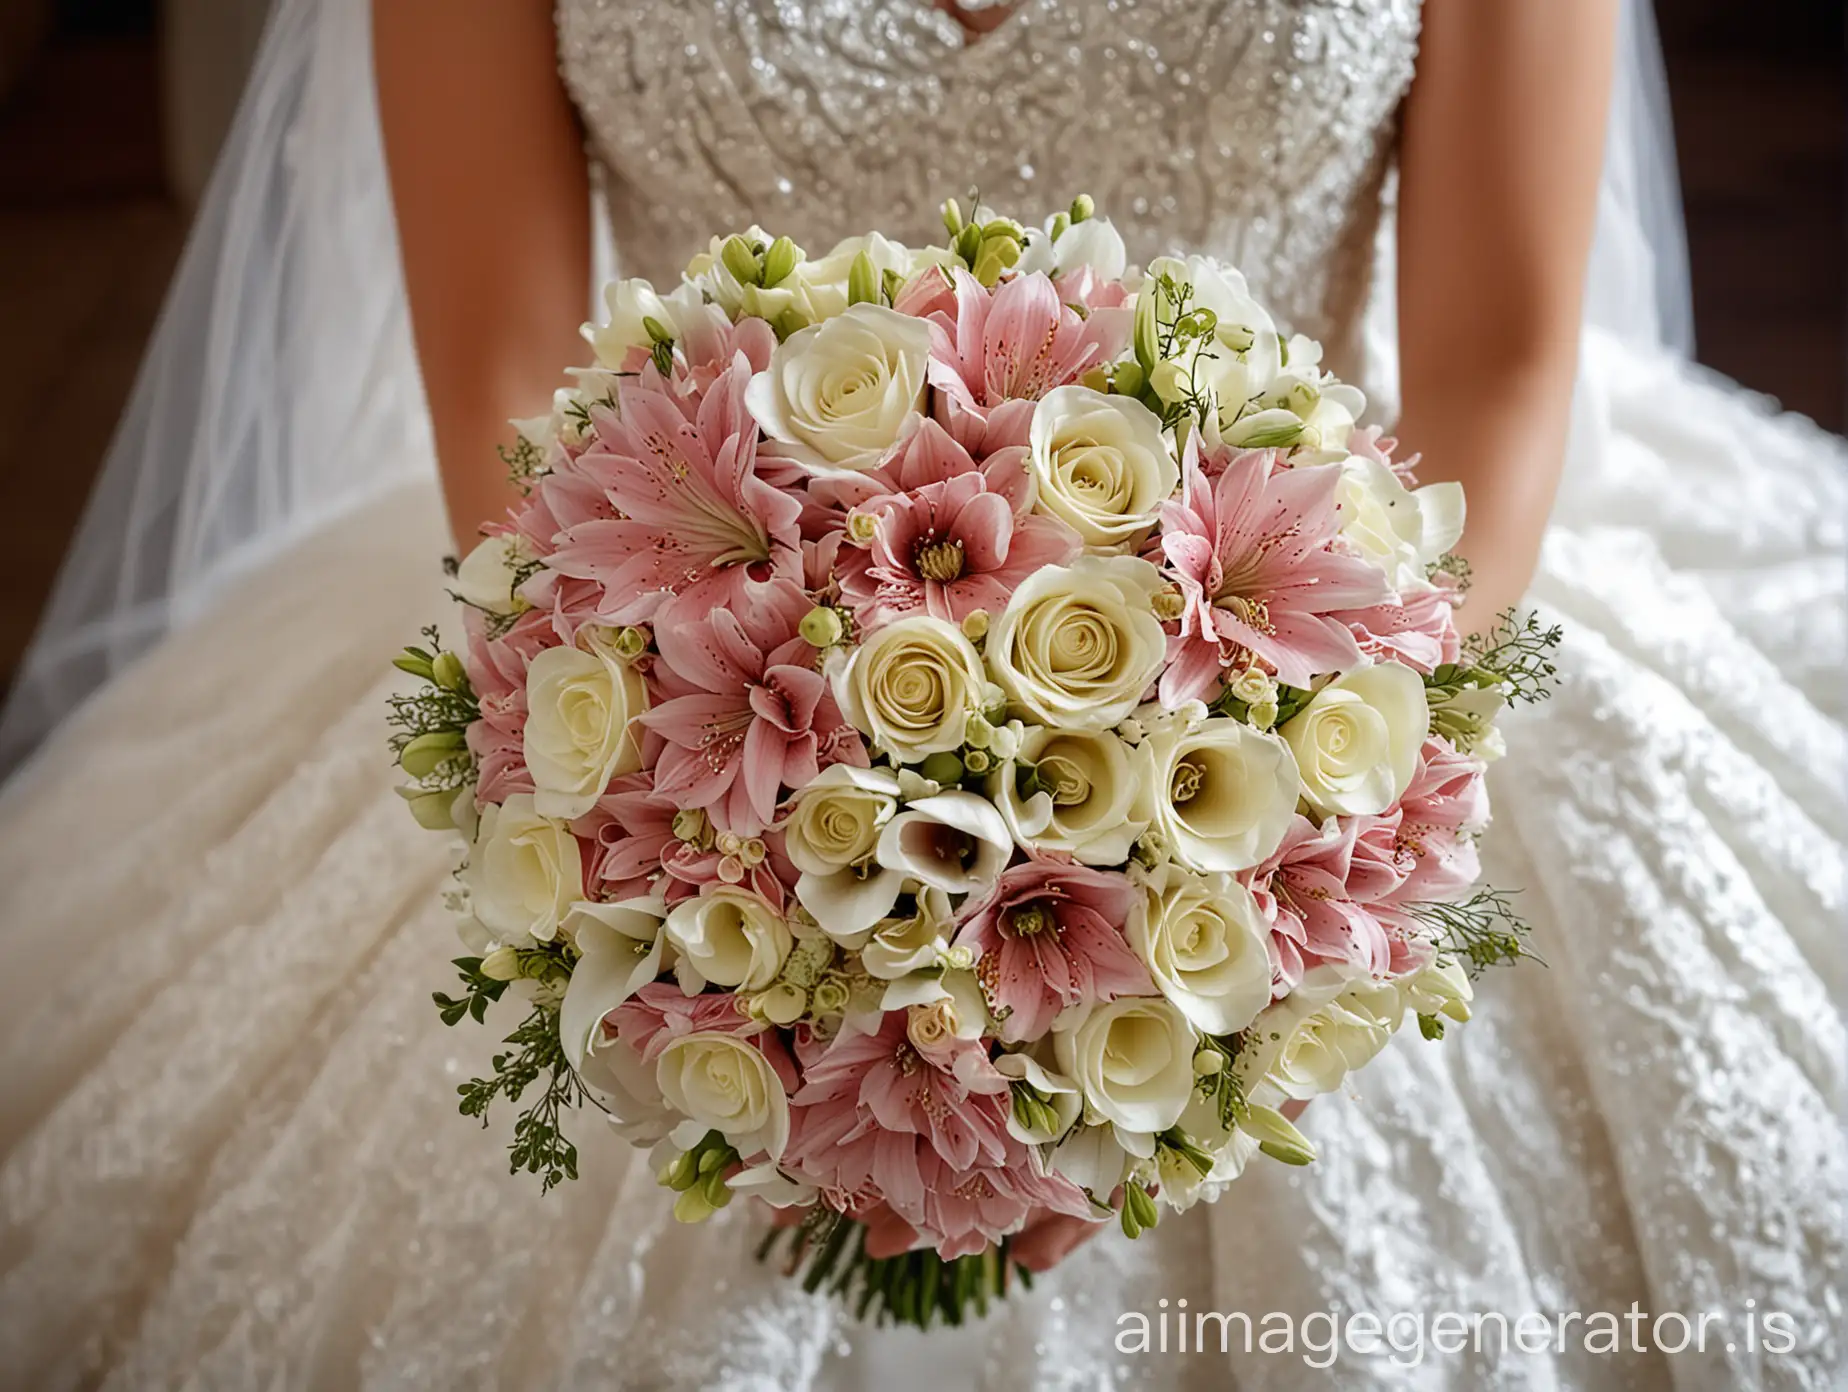 A close-up bridal bouquet in a bride's hand, This image focuses on the interaction between hands and flowers. Different colors bridal flowers are in harmony with the wedding dress. This moment reflects the beauty of a special day.